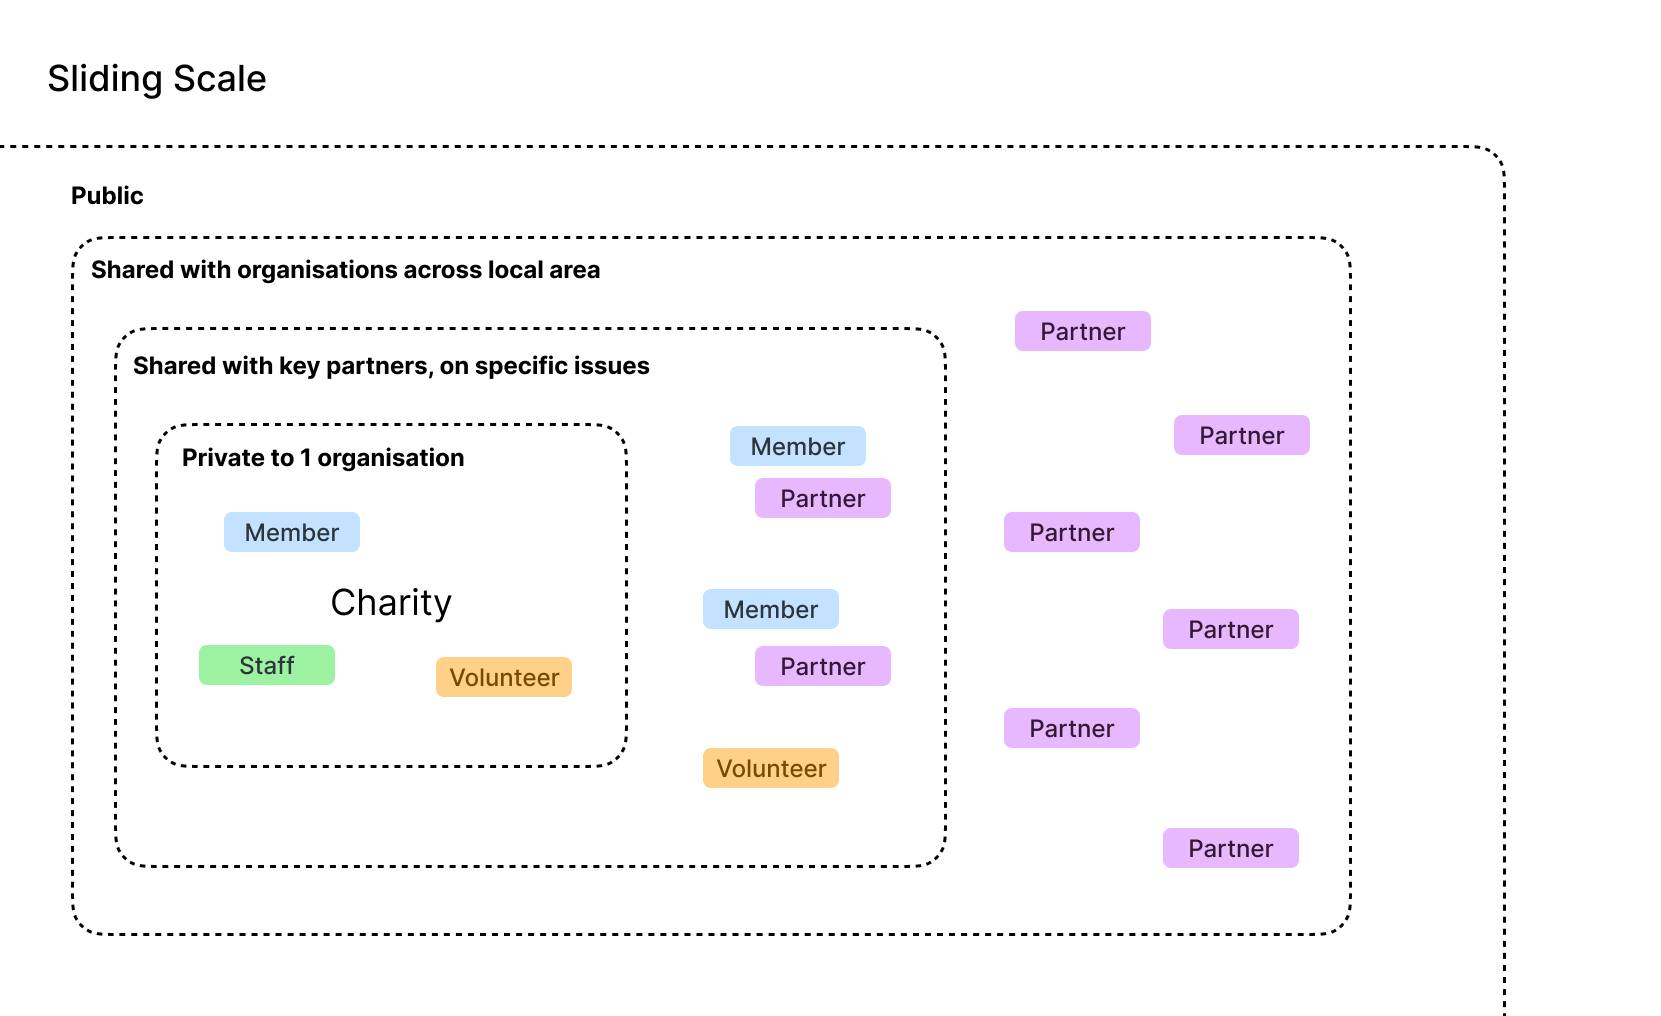 Going multiplayer. What does a collaborative platform mean for charities?